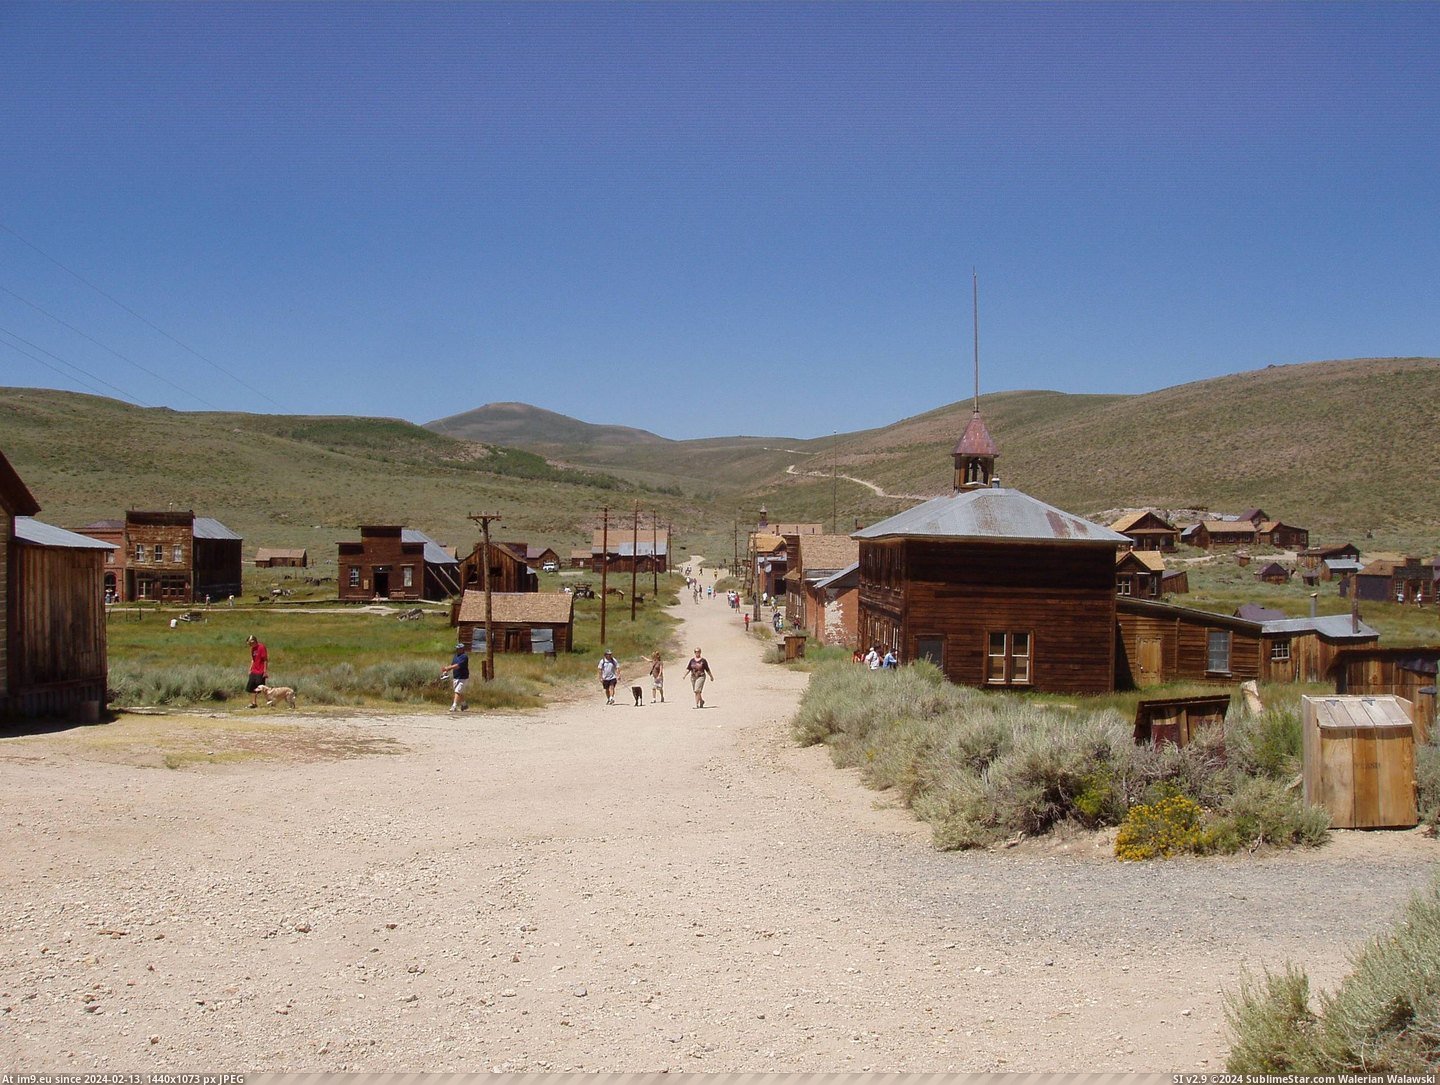 Bodie 6 Aug. 2006 (in Bodie - a ghost town in Eastern California)